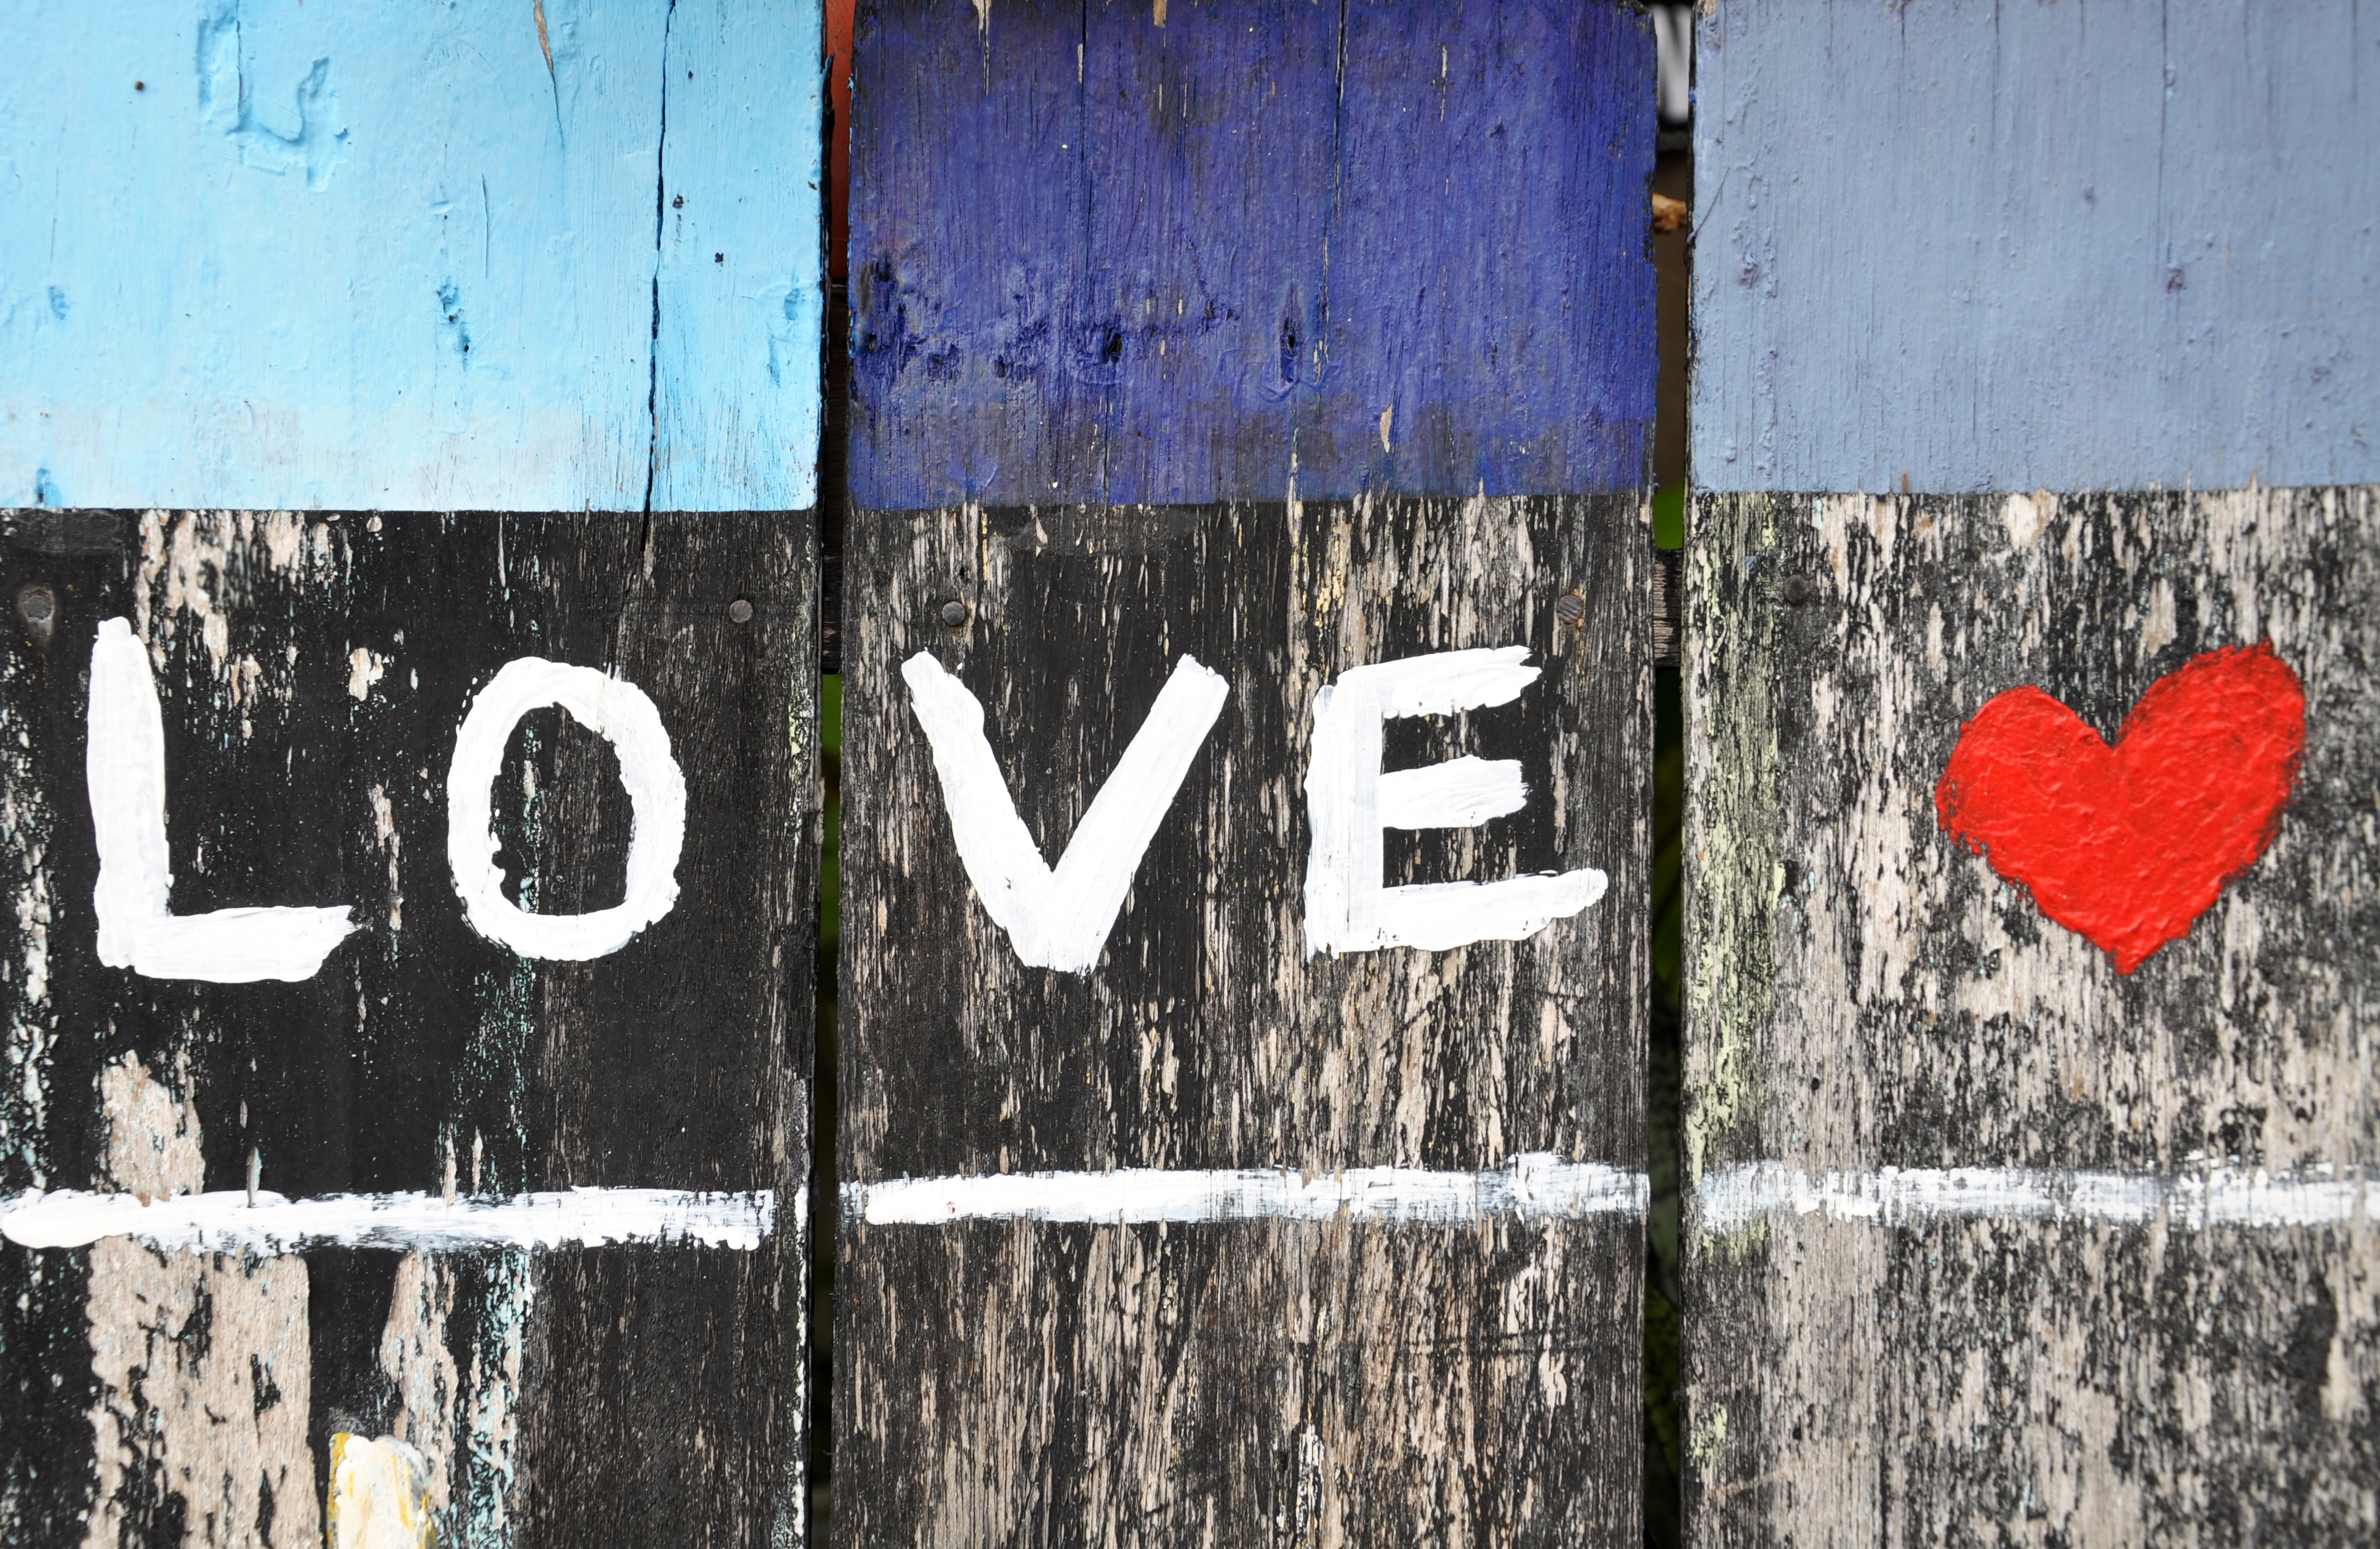 Wooden fence painted with word "love" and a red heart